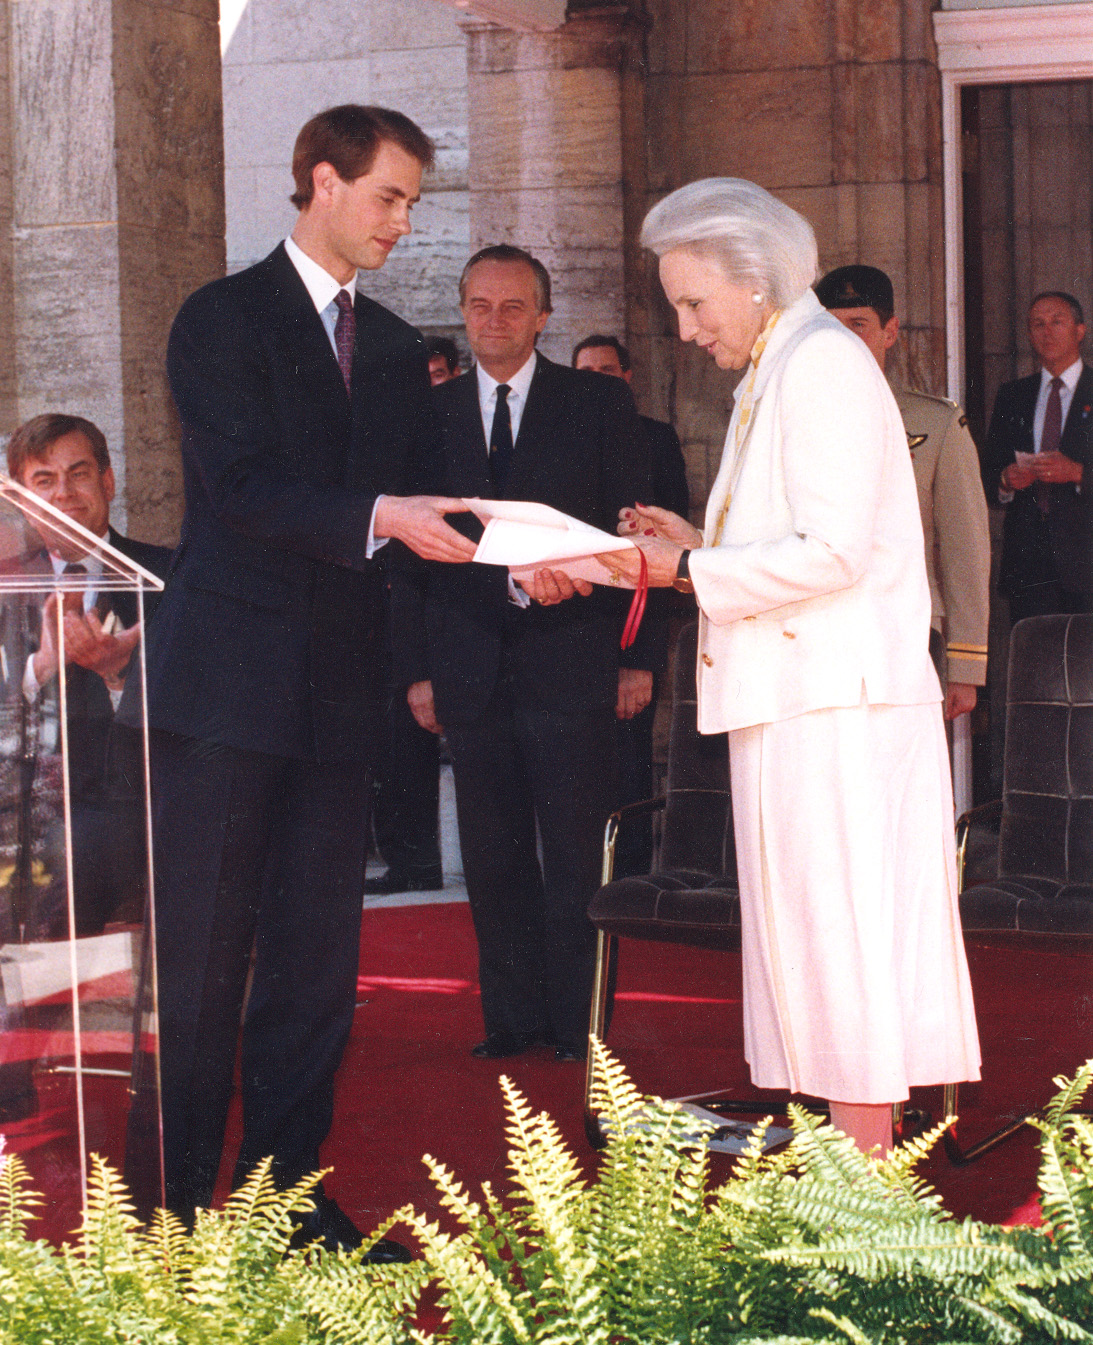 Governor General Jeanne Sauvé receiving the Royal Letters Patent from His Royal Highness the Prince Edward at Rideau Hall on June 4, 1988